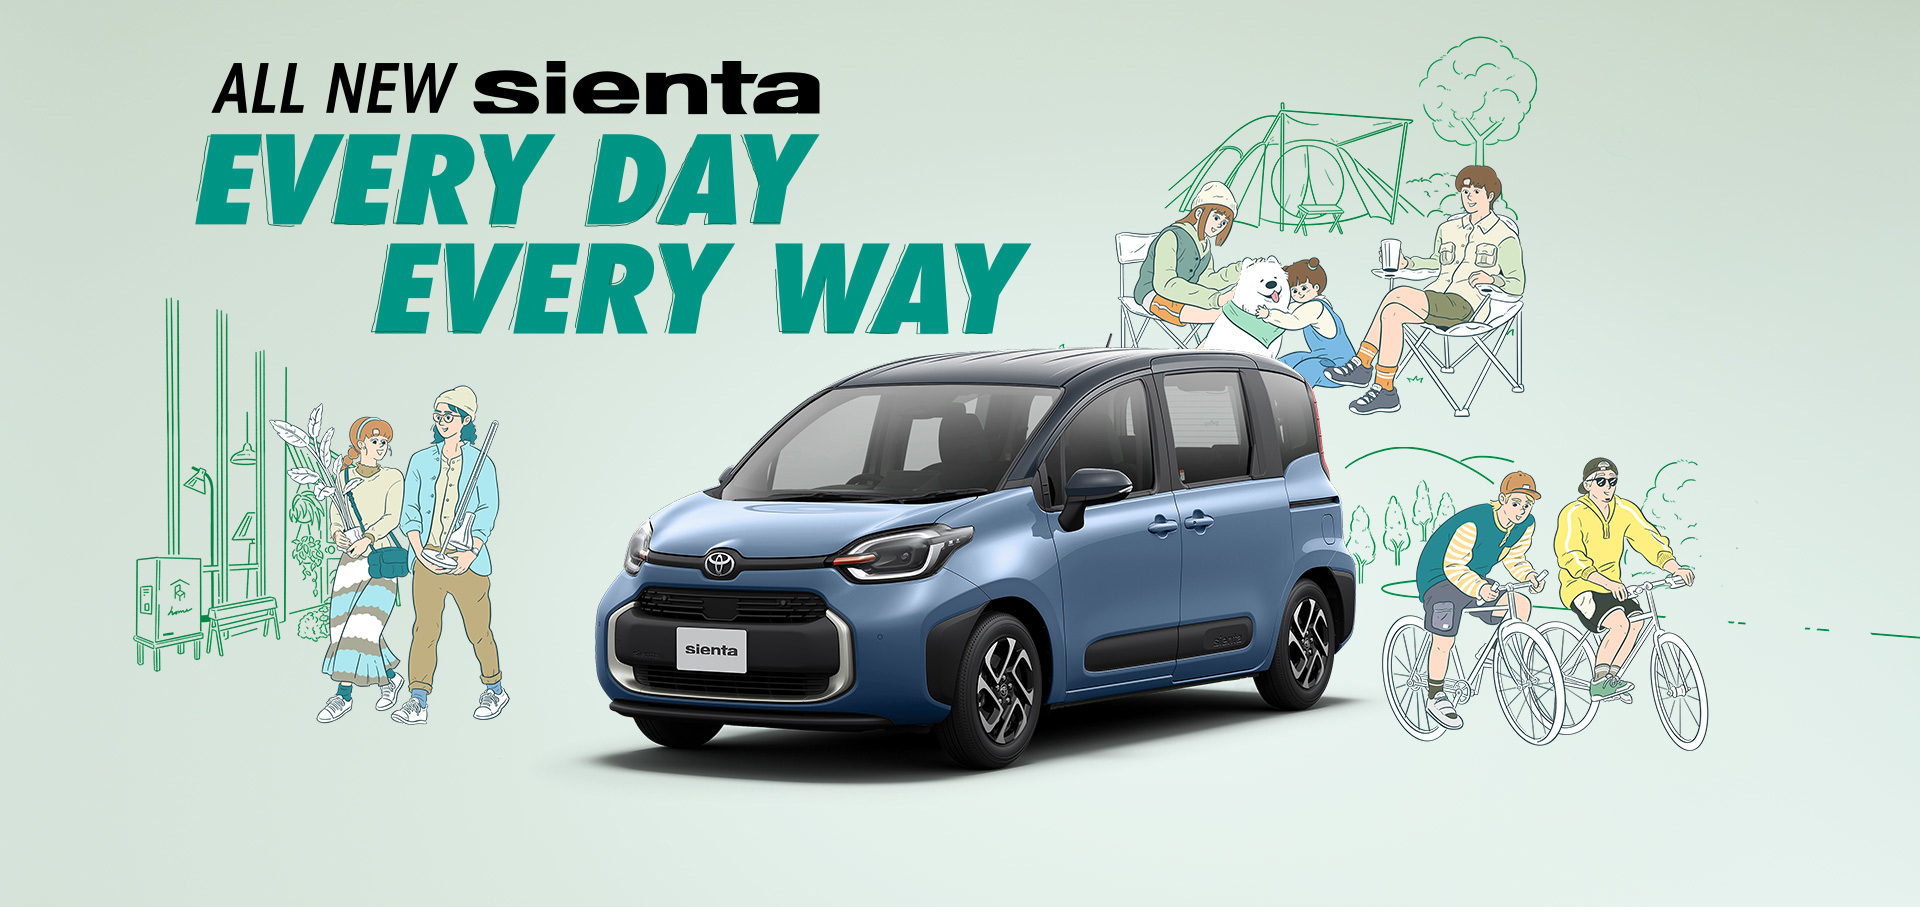 All-New Sienta | Every Day Every Way | 7 Seater Cars